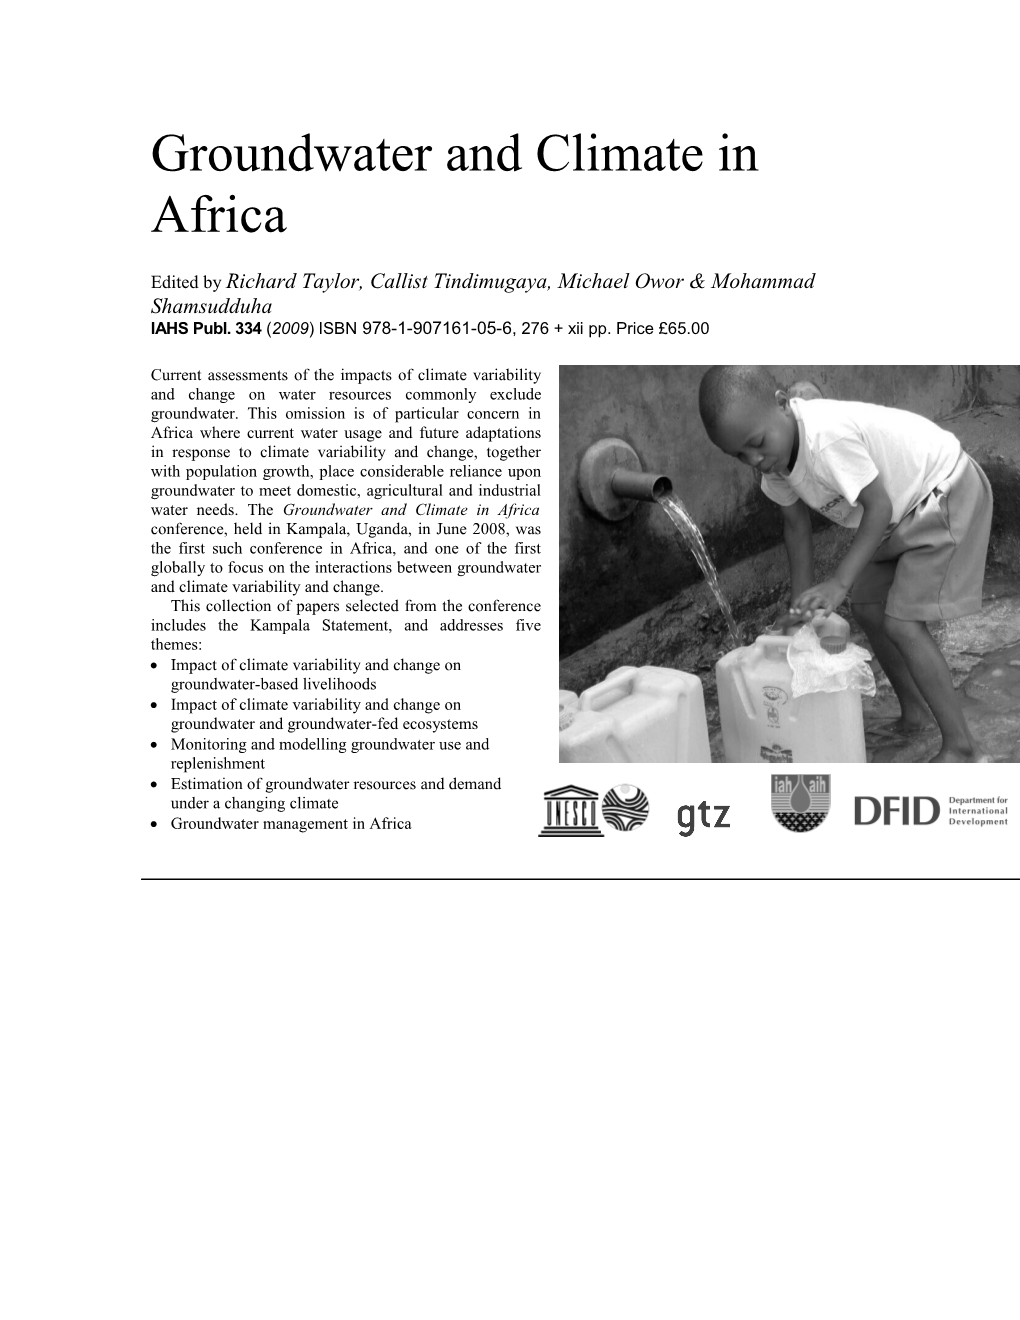 Groundwater and Climate in Africa